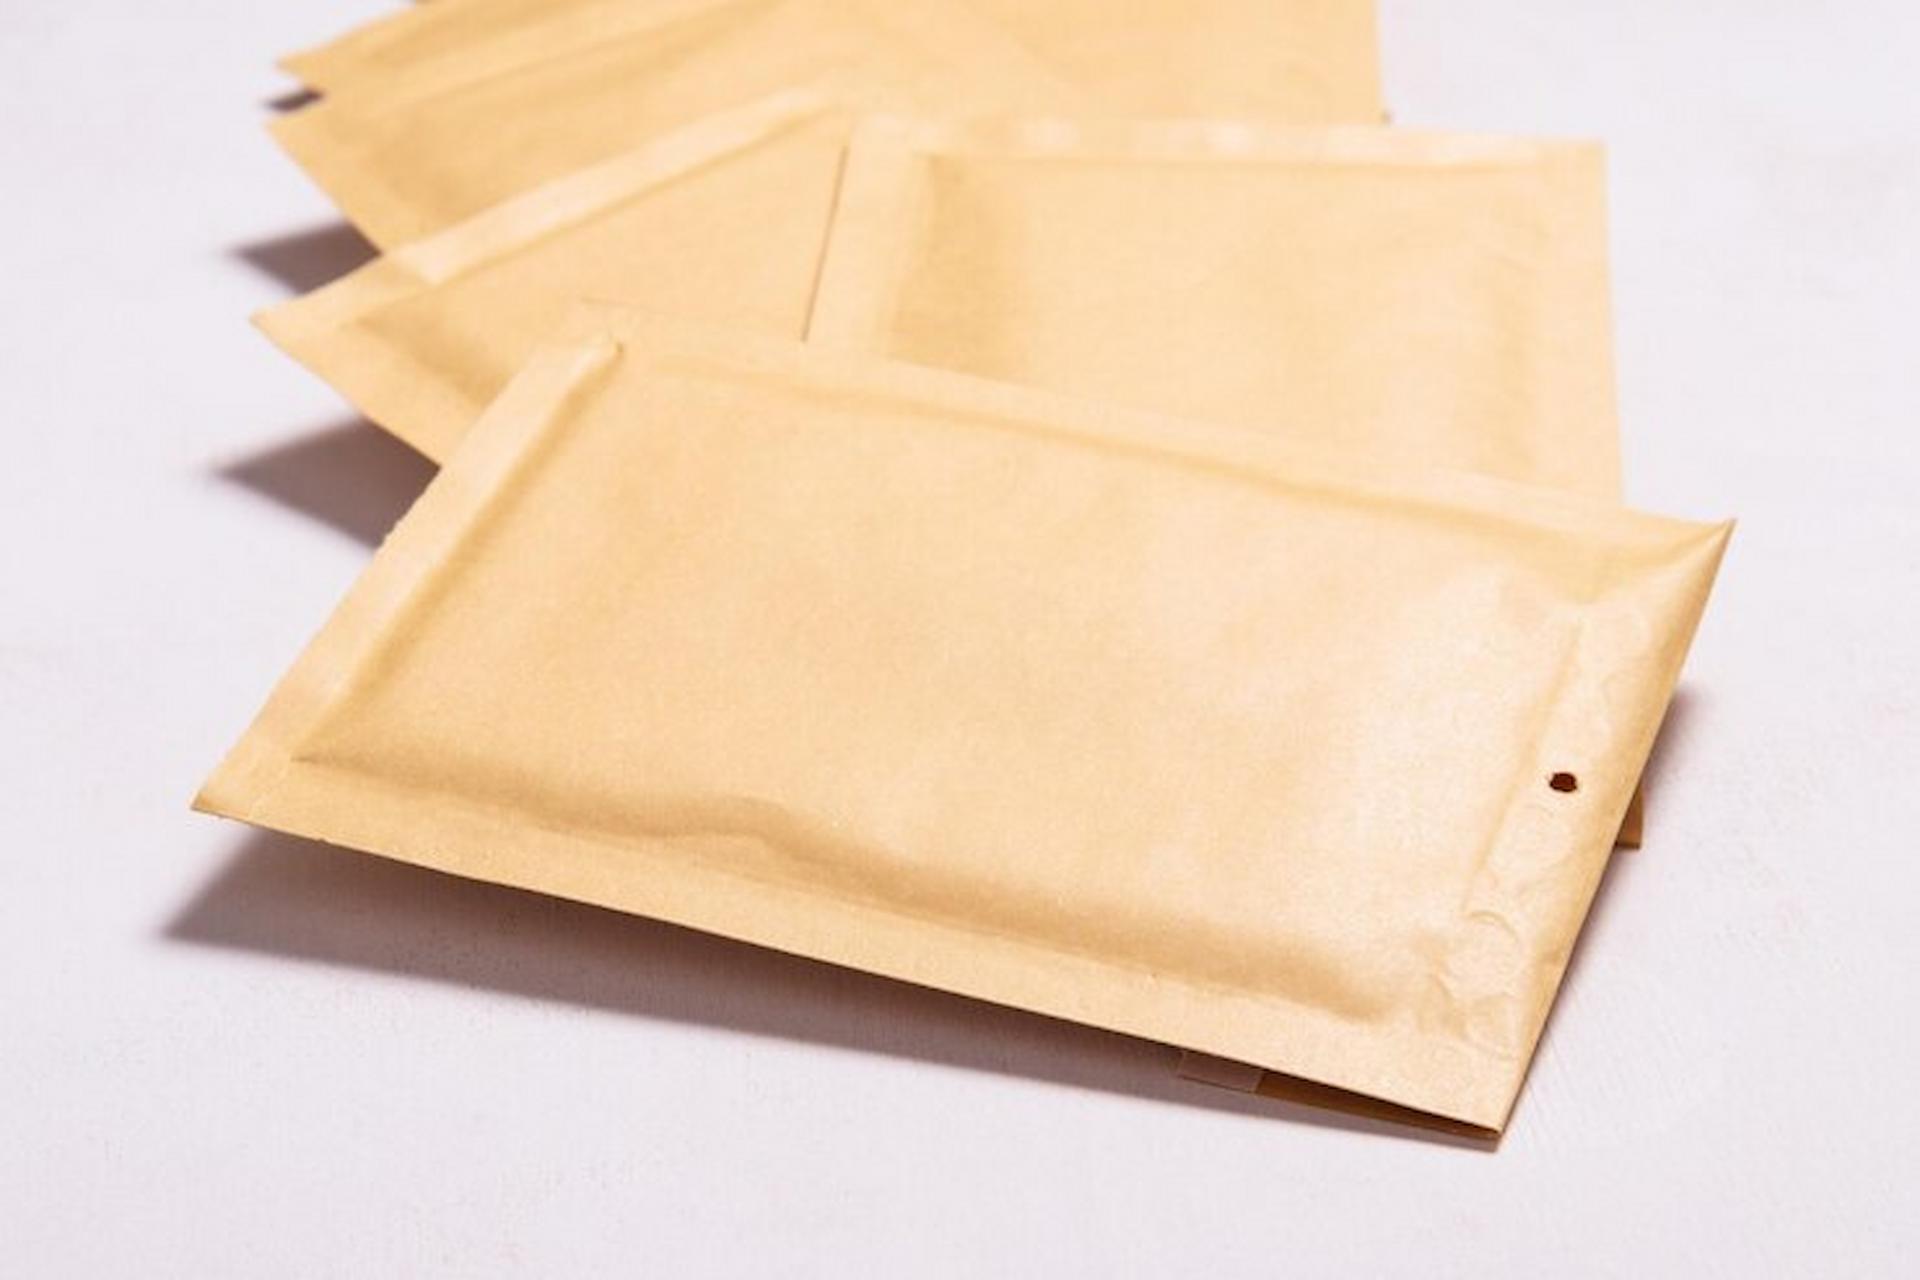 7 Creative Ways to Use Custom Mailing Bags for Your Business